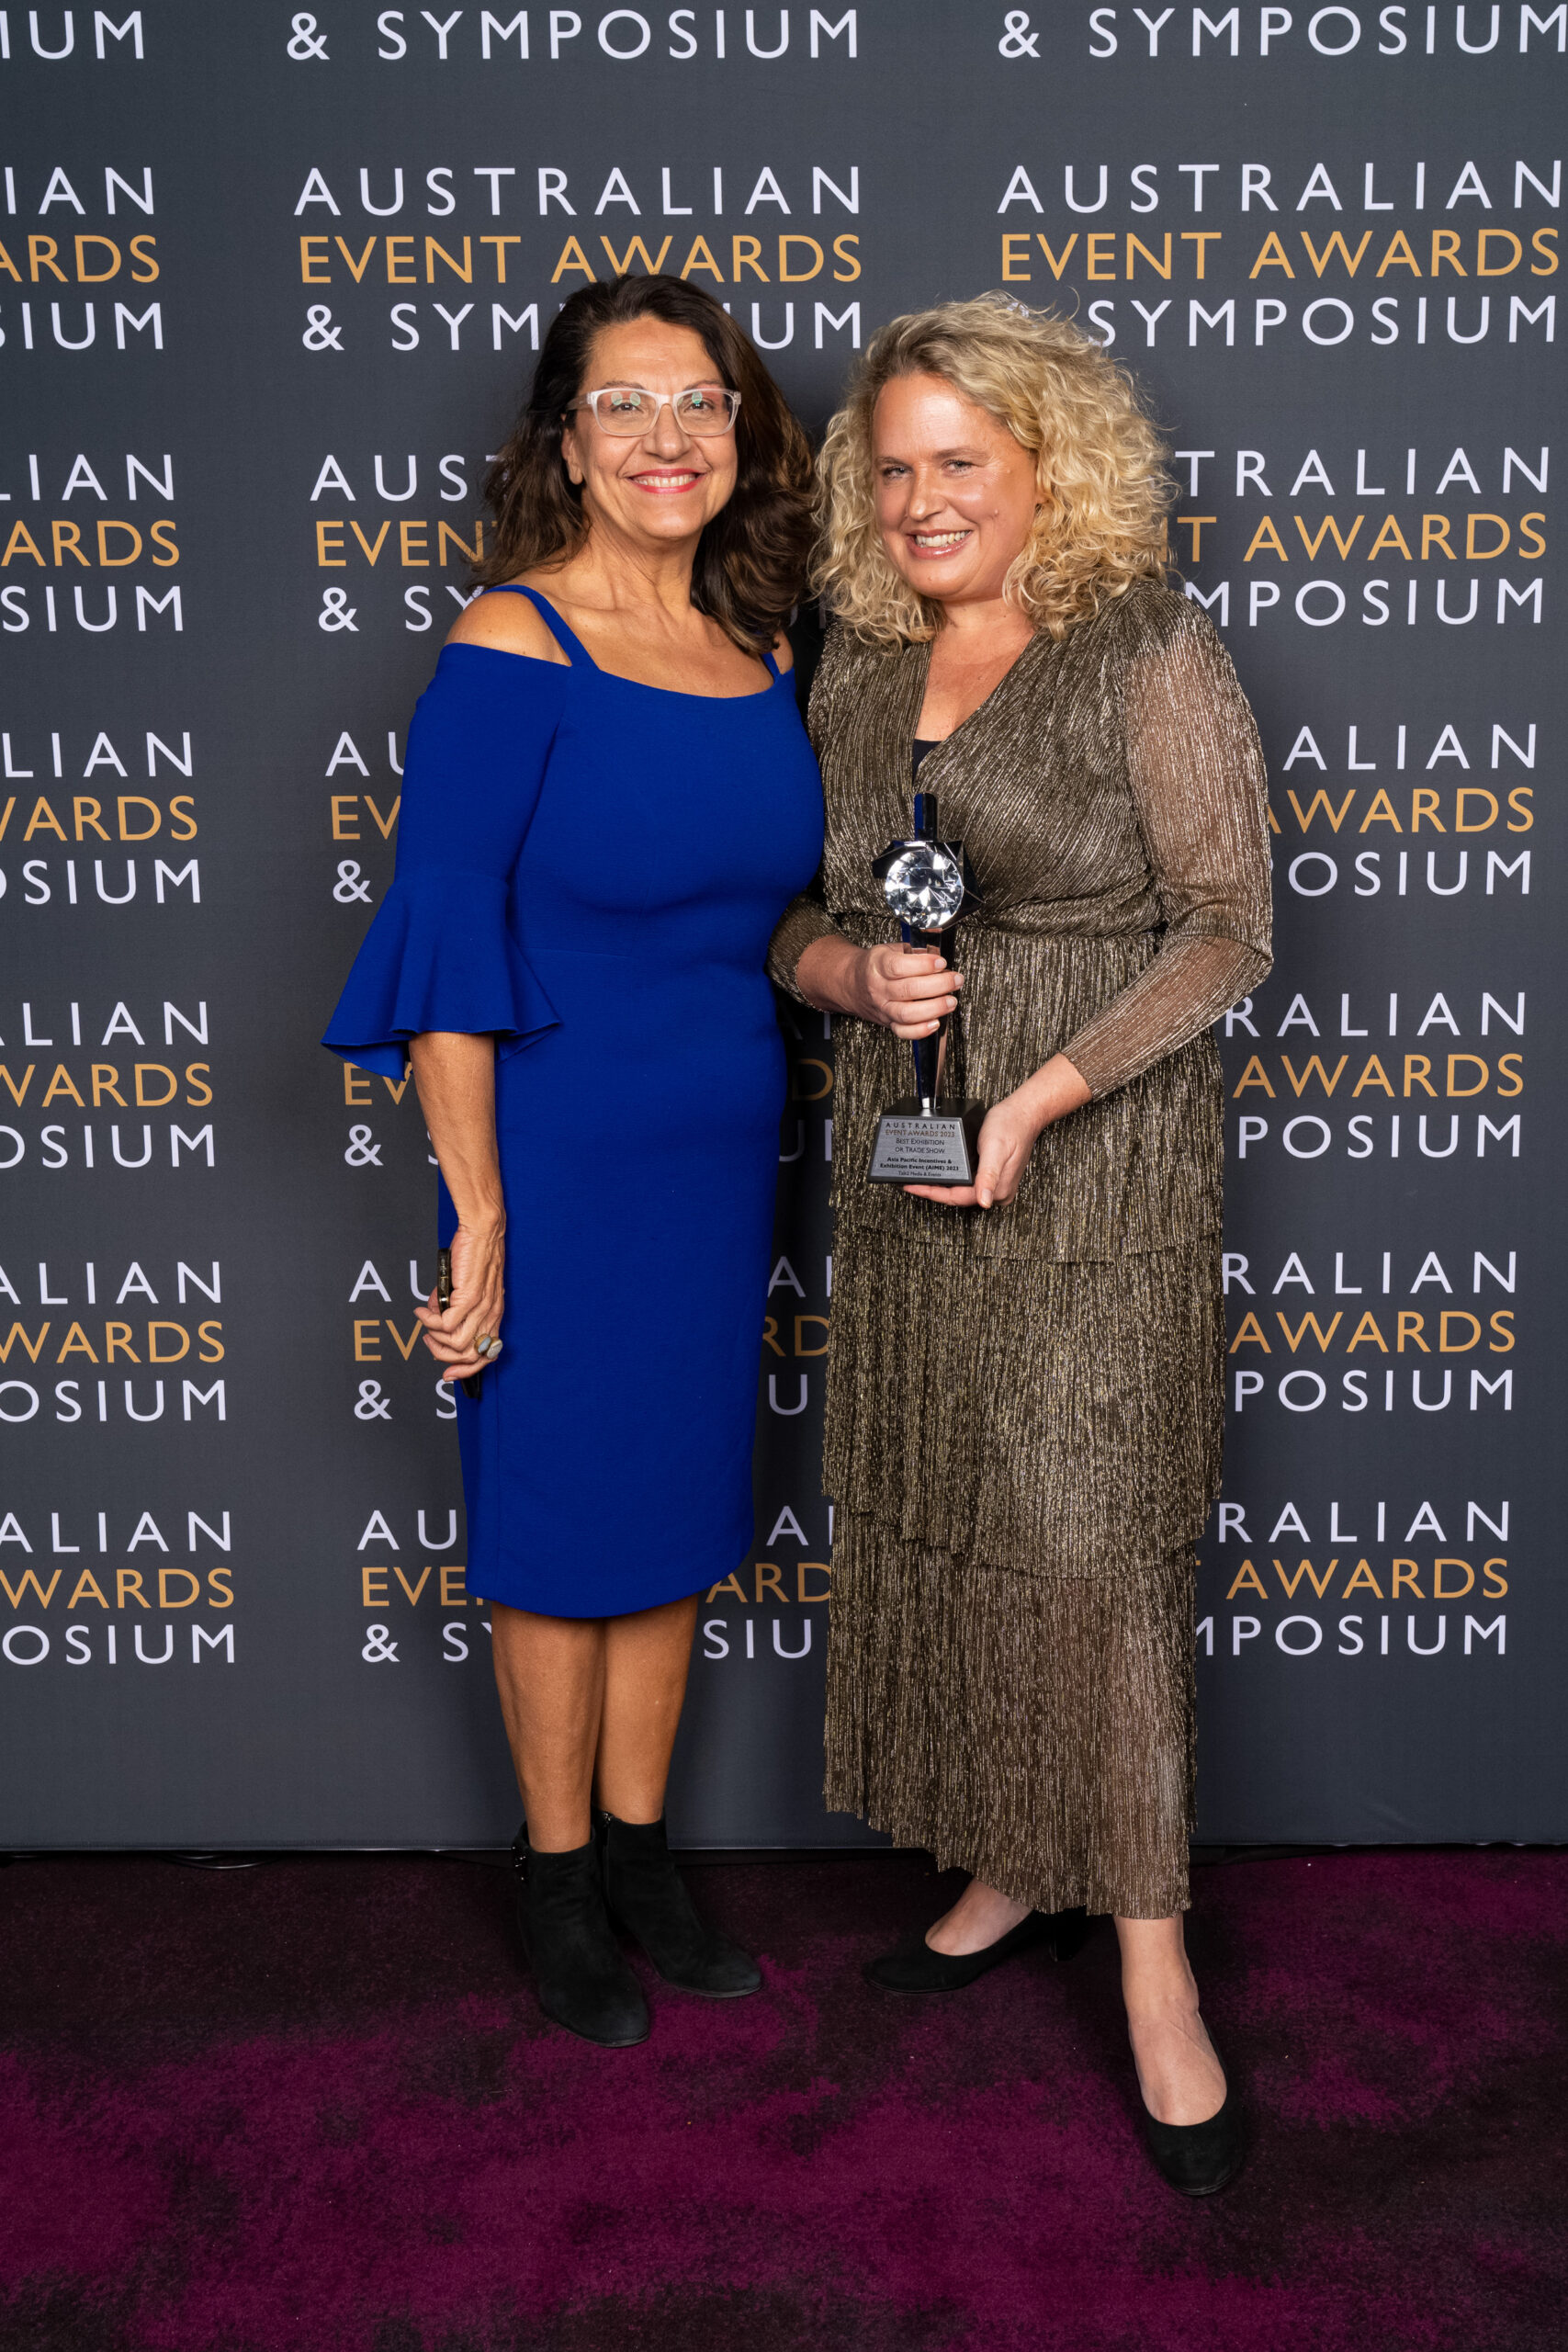 AIME Wins at the Australian Event Awards and Symposium